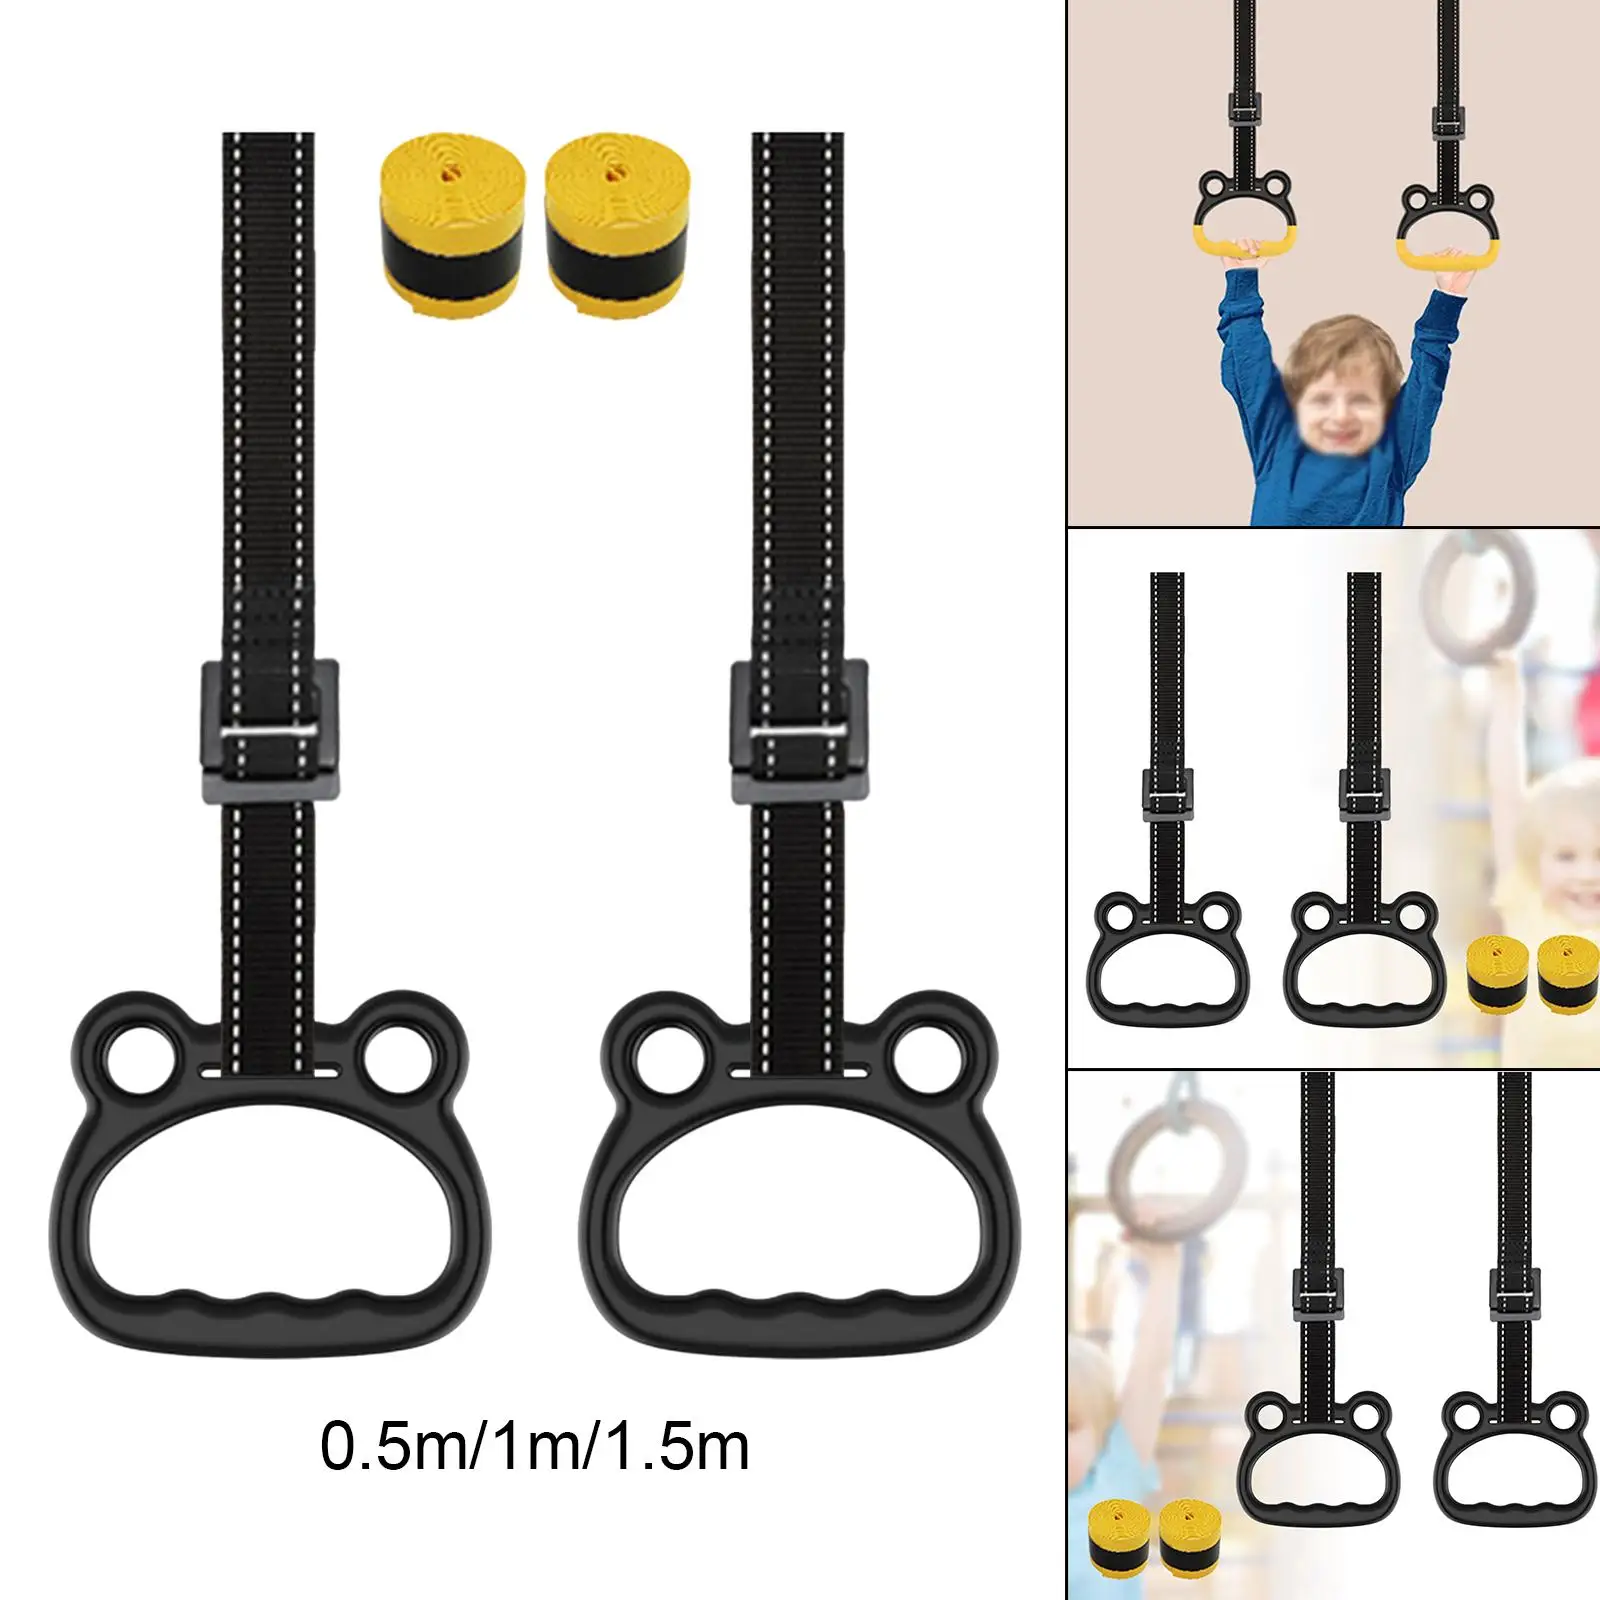 Gymnasticss Non Slips Adjustable Hanging Exercises Bar Attachment Workouts for Kids Adult Fitness Equipment Gym 